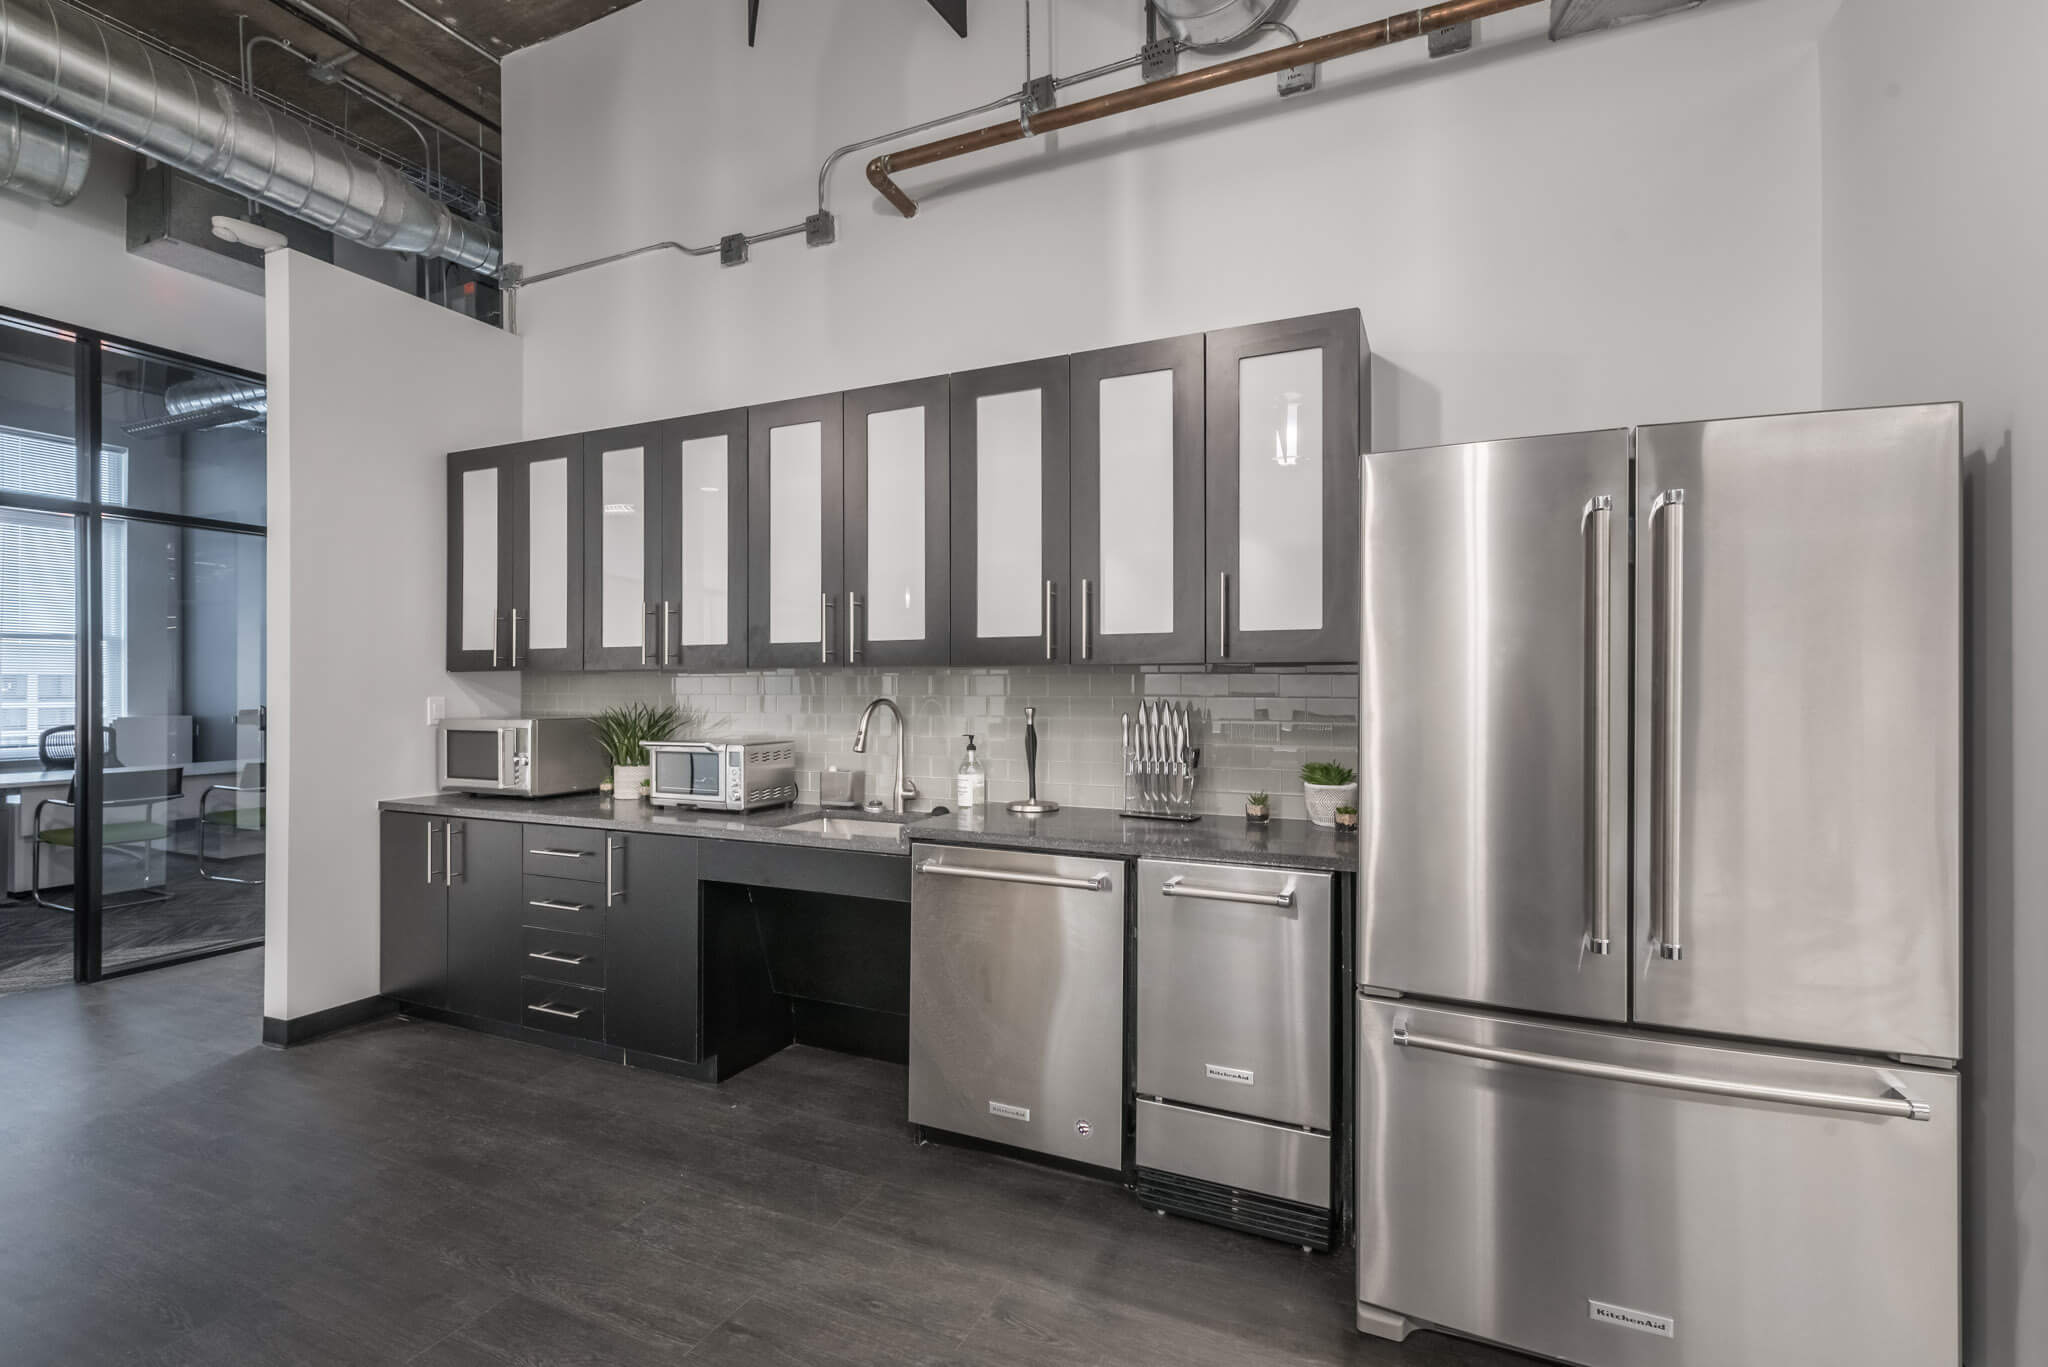 A kitchen with stainless steel appliances and cabinets.